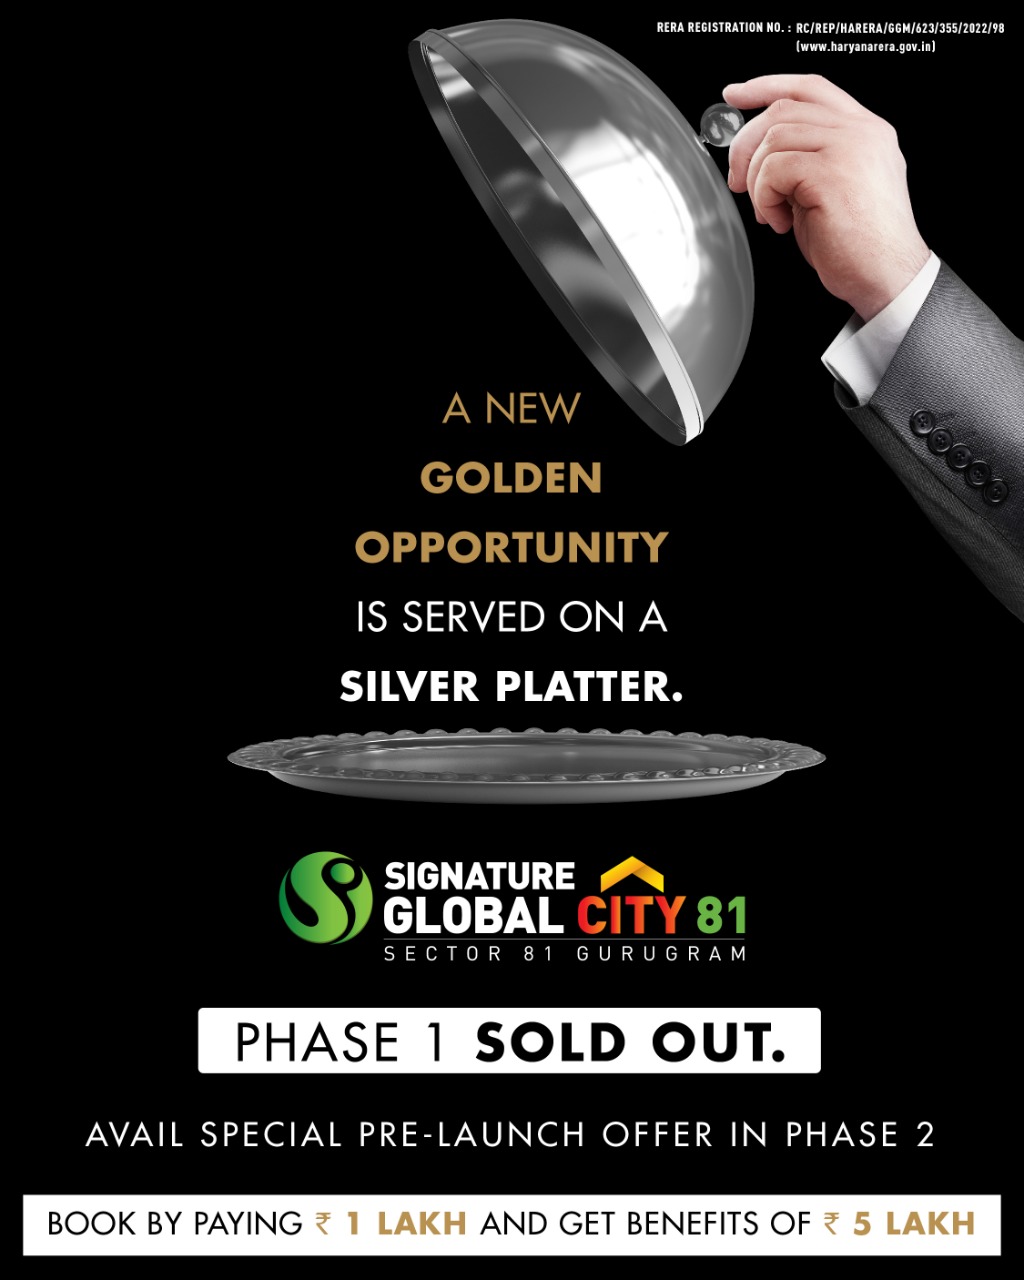 Book with Rs. 1 Lac & get additional benefits of Rs. 5 Lac at Signature Global City 81, Gurgaon Update